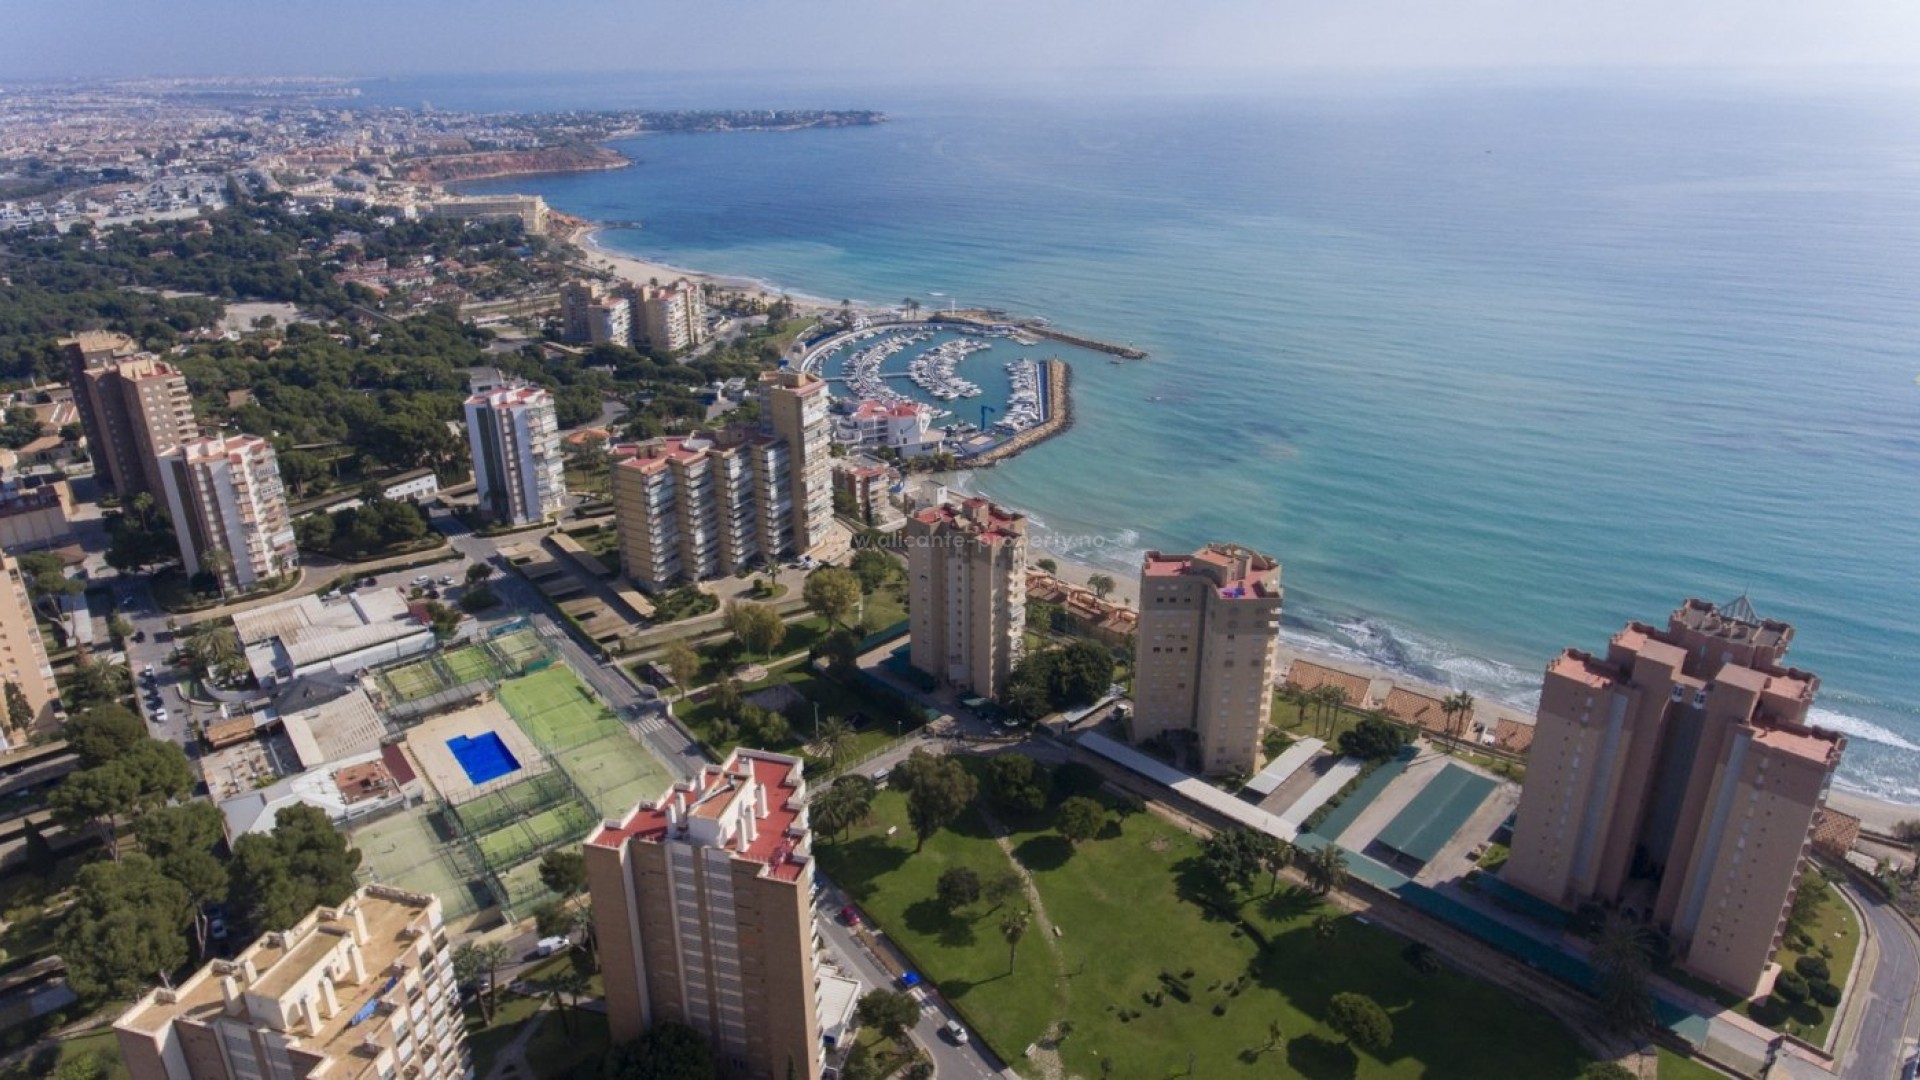 Luxury property in Campoamor with apartments and penthouses, 2/3 bedrooms, 2 bathrooms, private solarium or private garden, all with large terraces